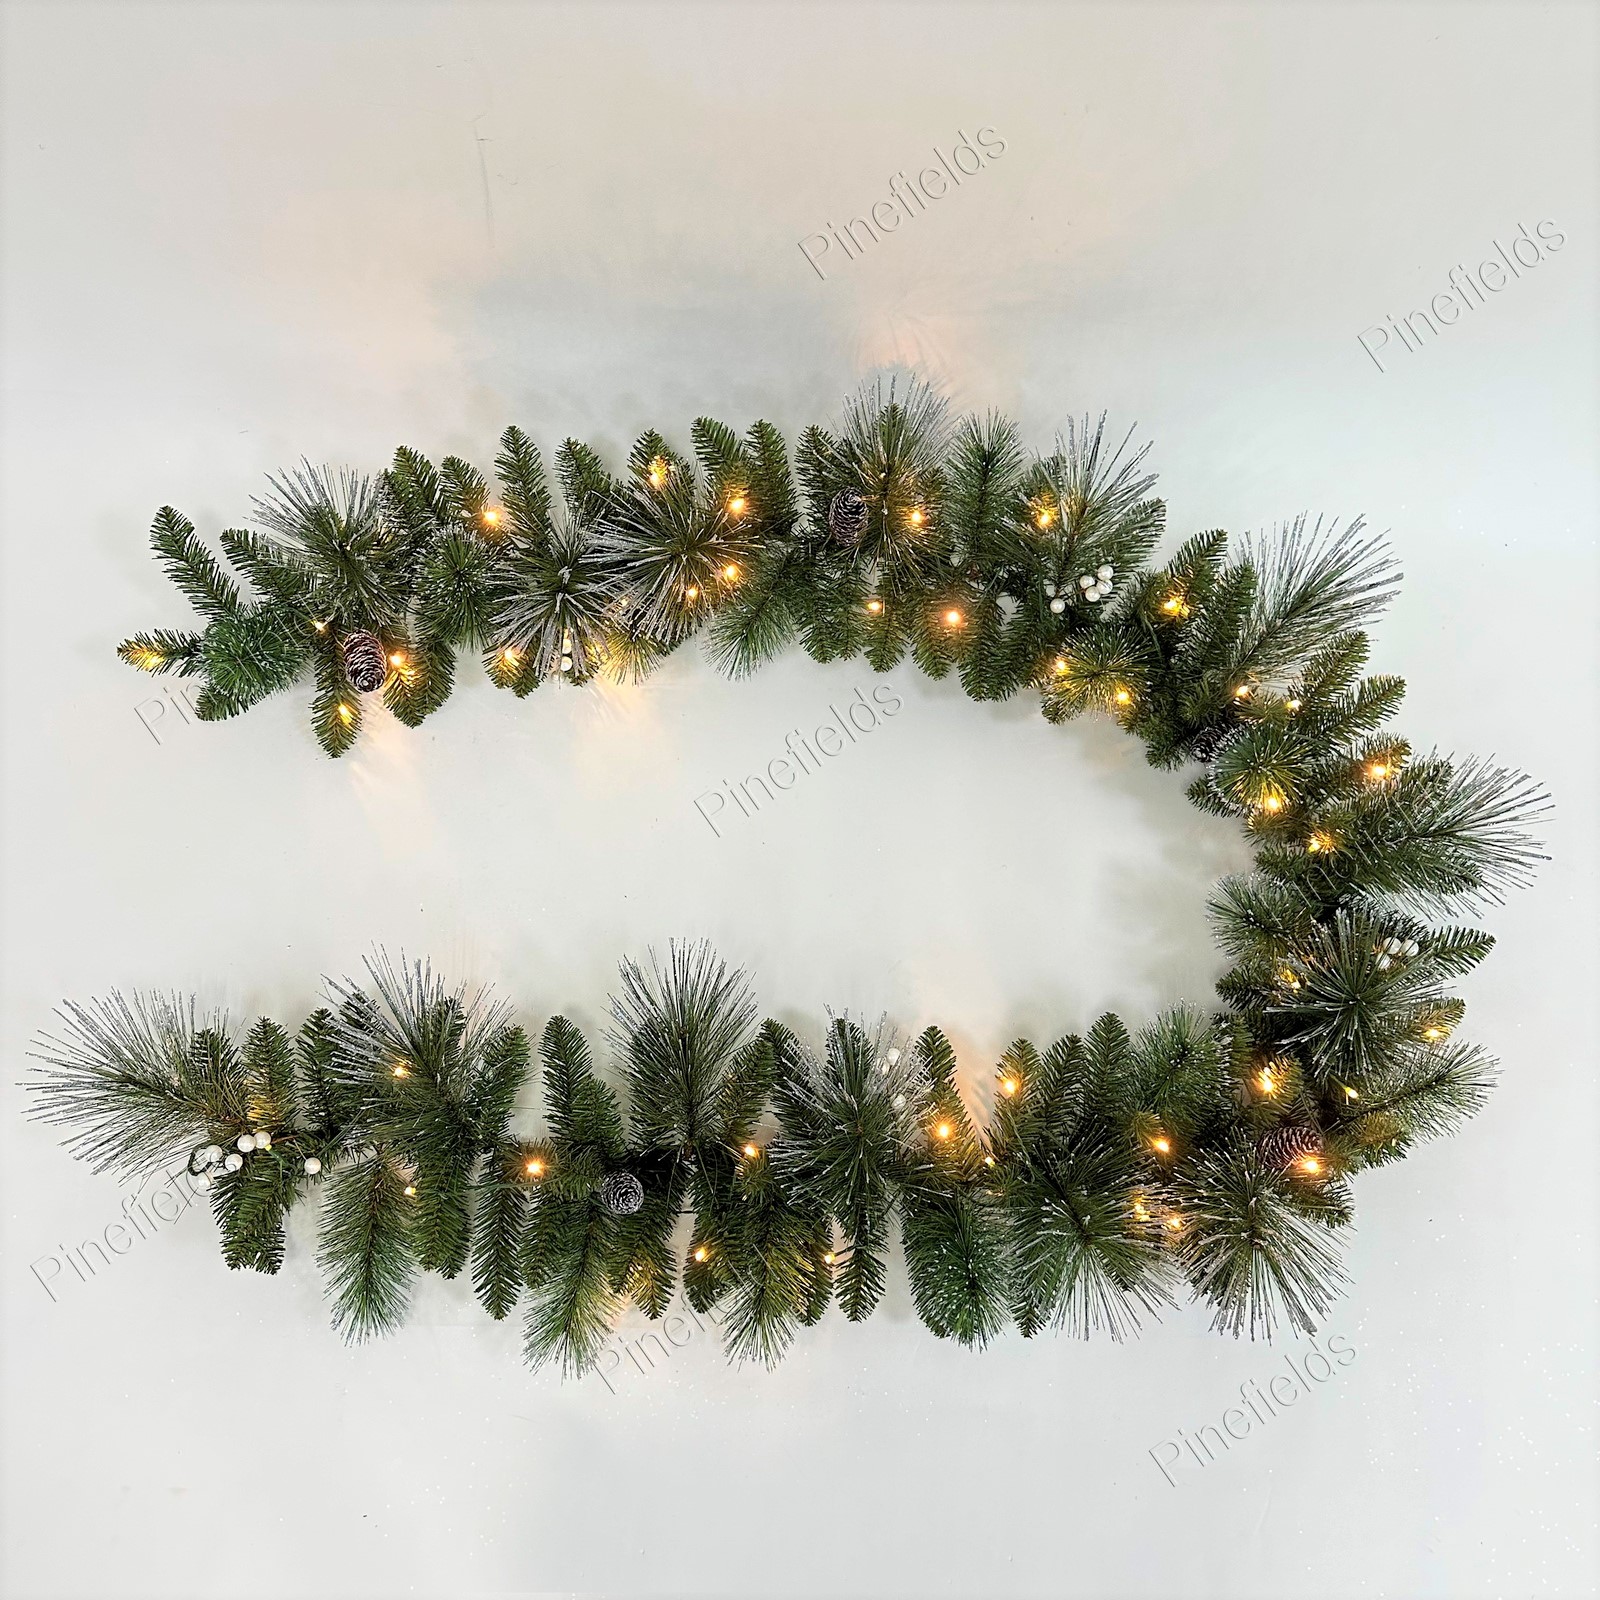 Artificial Christmas Garland, Christmas Garland With Pinecones And White Berries, Christmas Garland With Lights, twisted.#SFG-108G152G-50BC-B